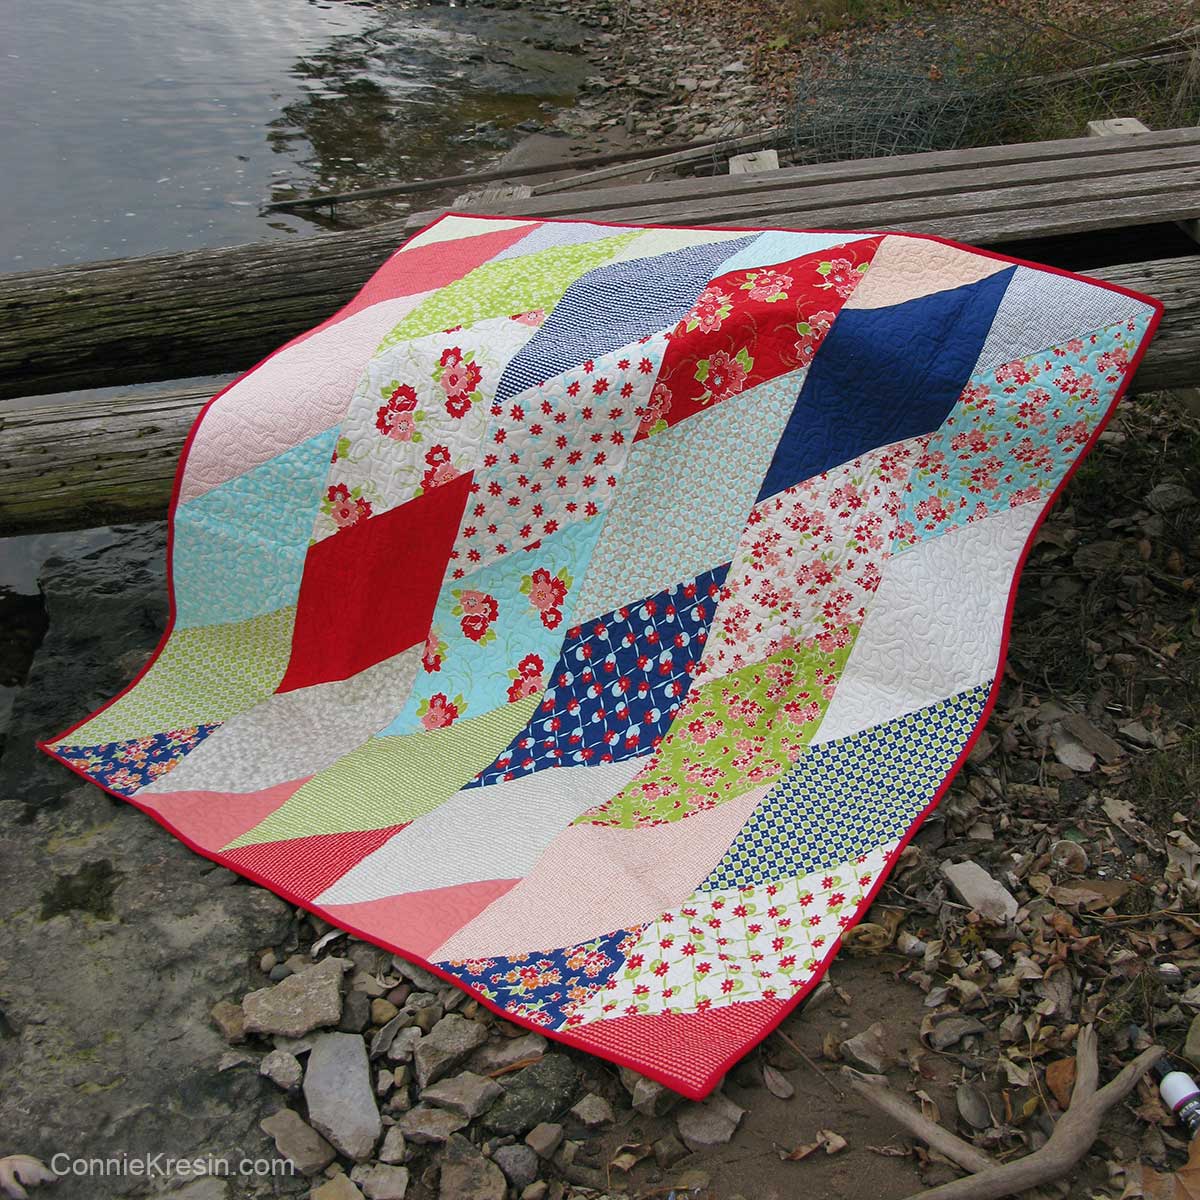 Quilt on telephone pole by the river